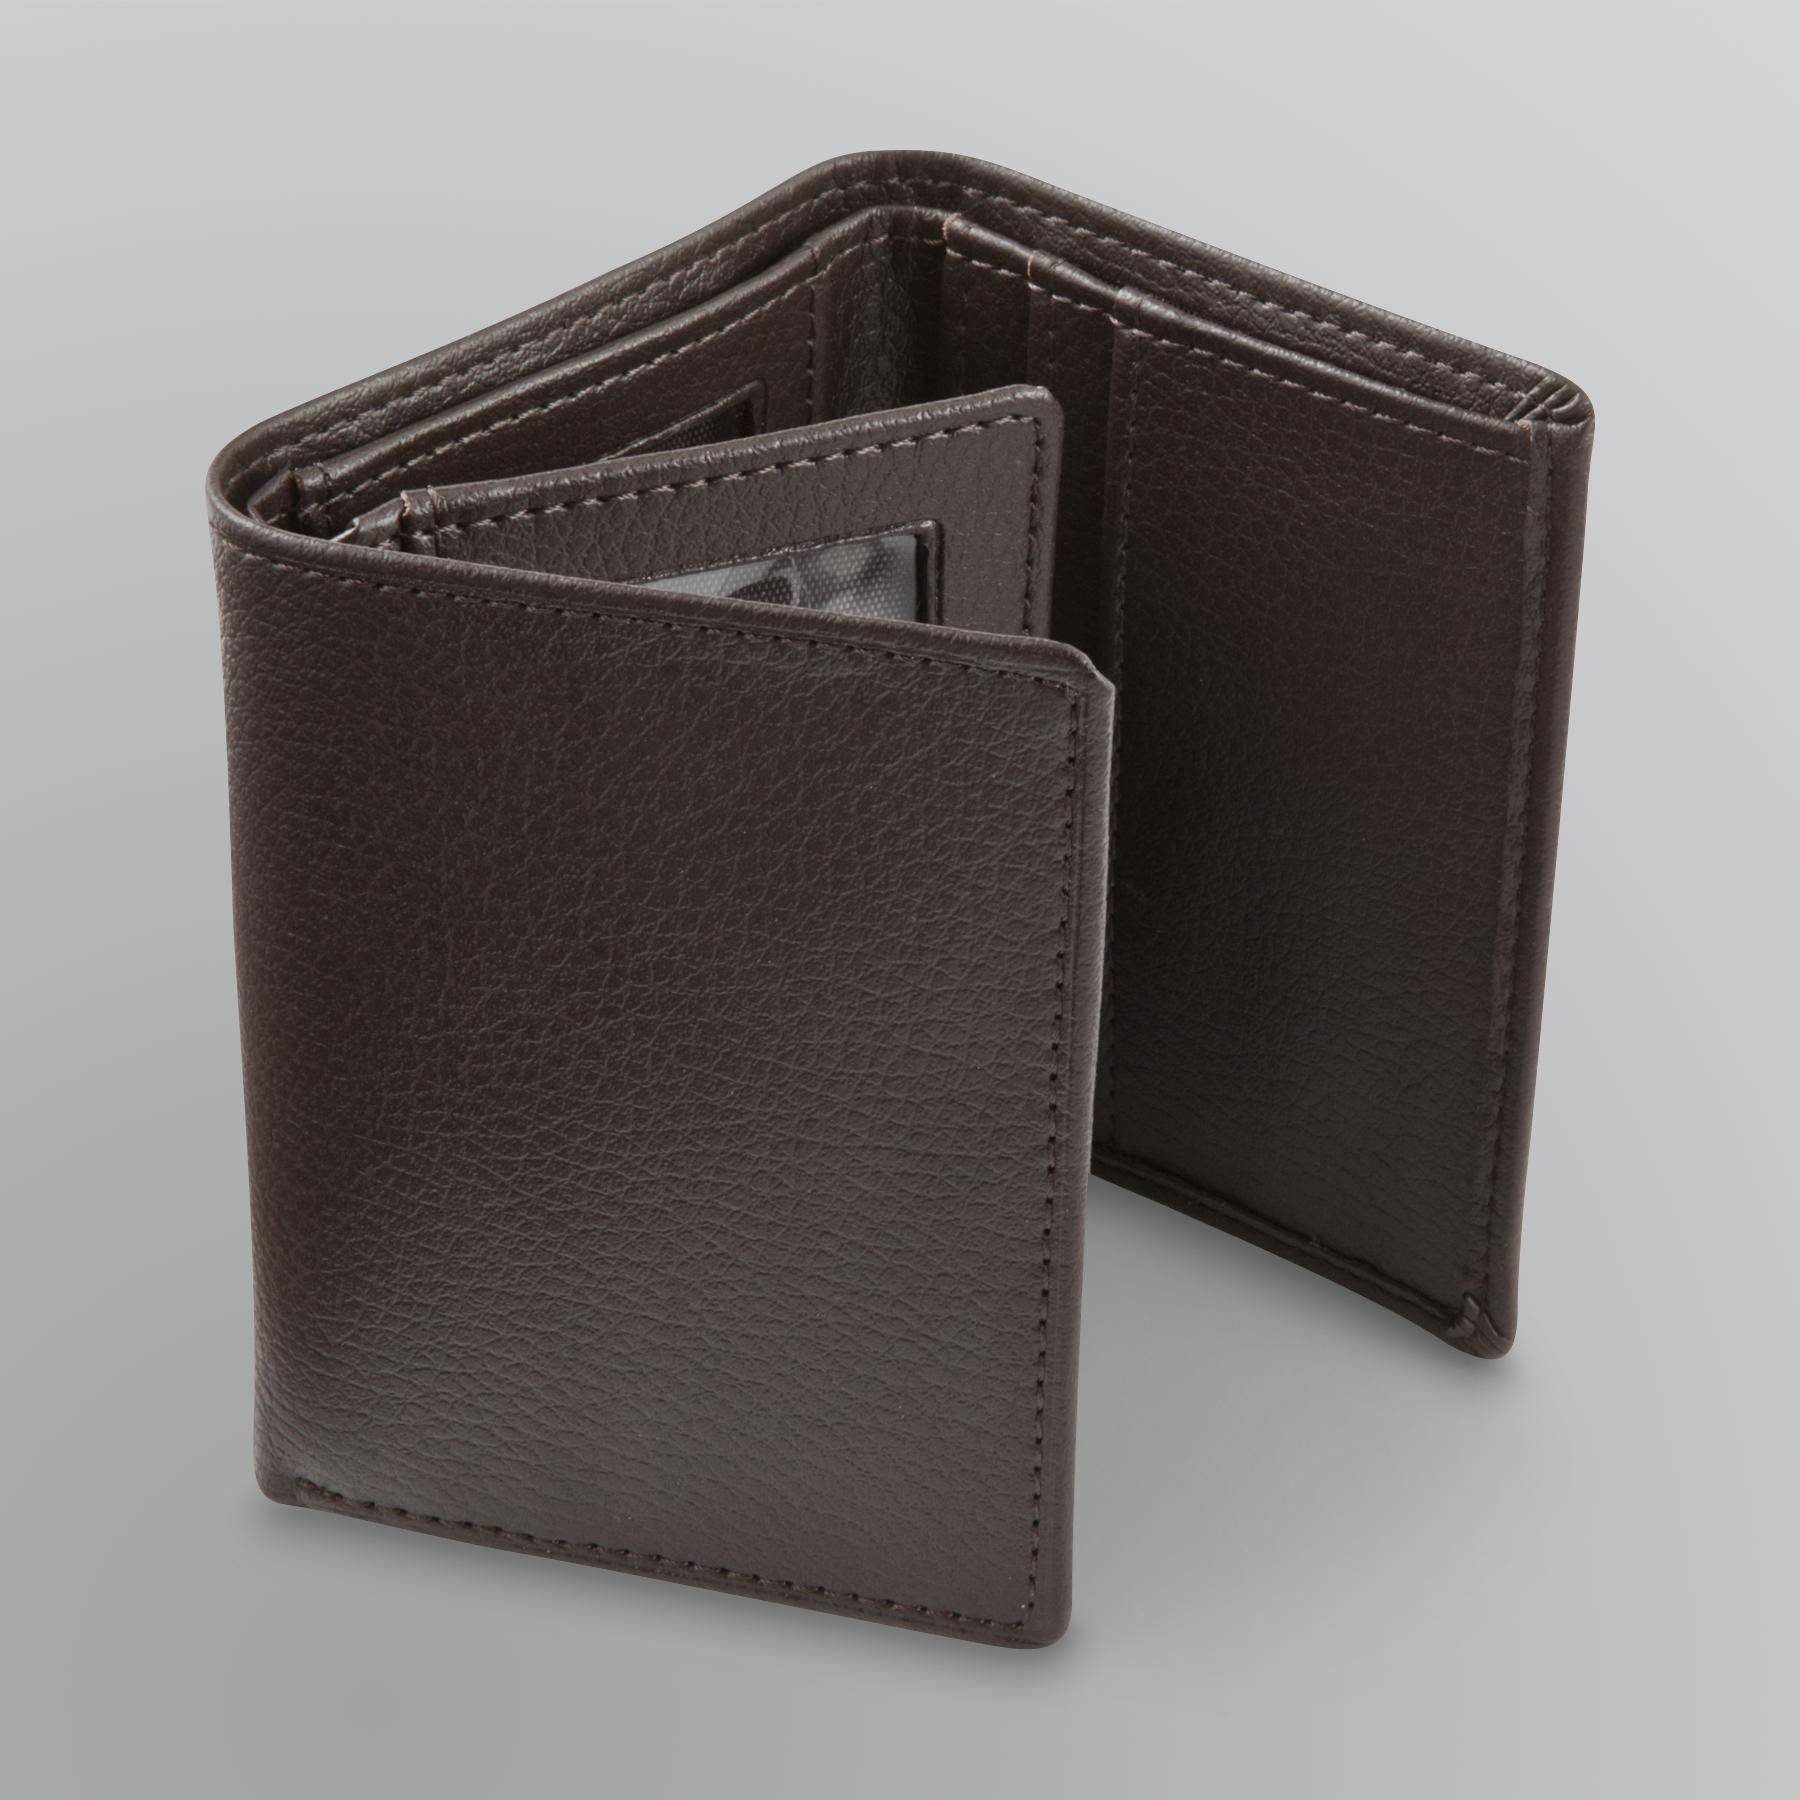 David Taylor Collection Men's Textured Trifold Wallet